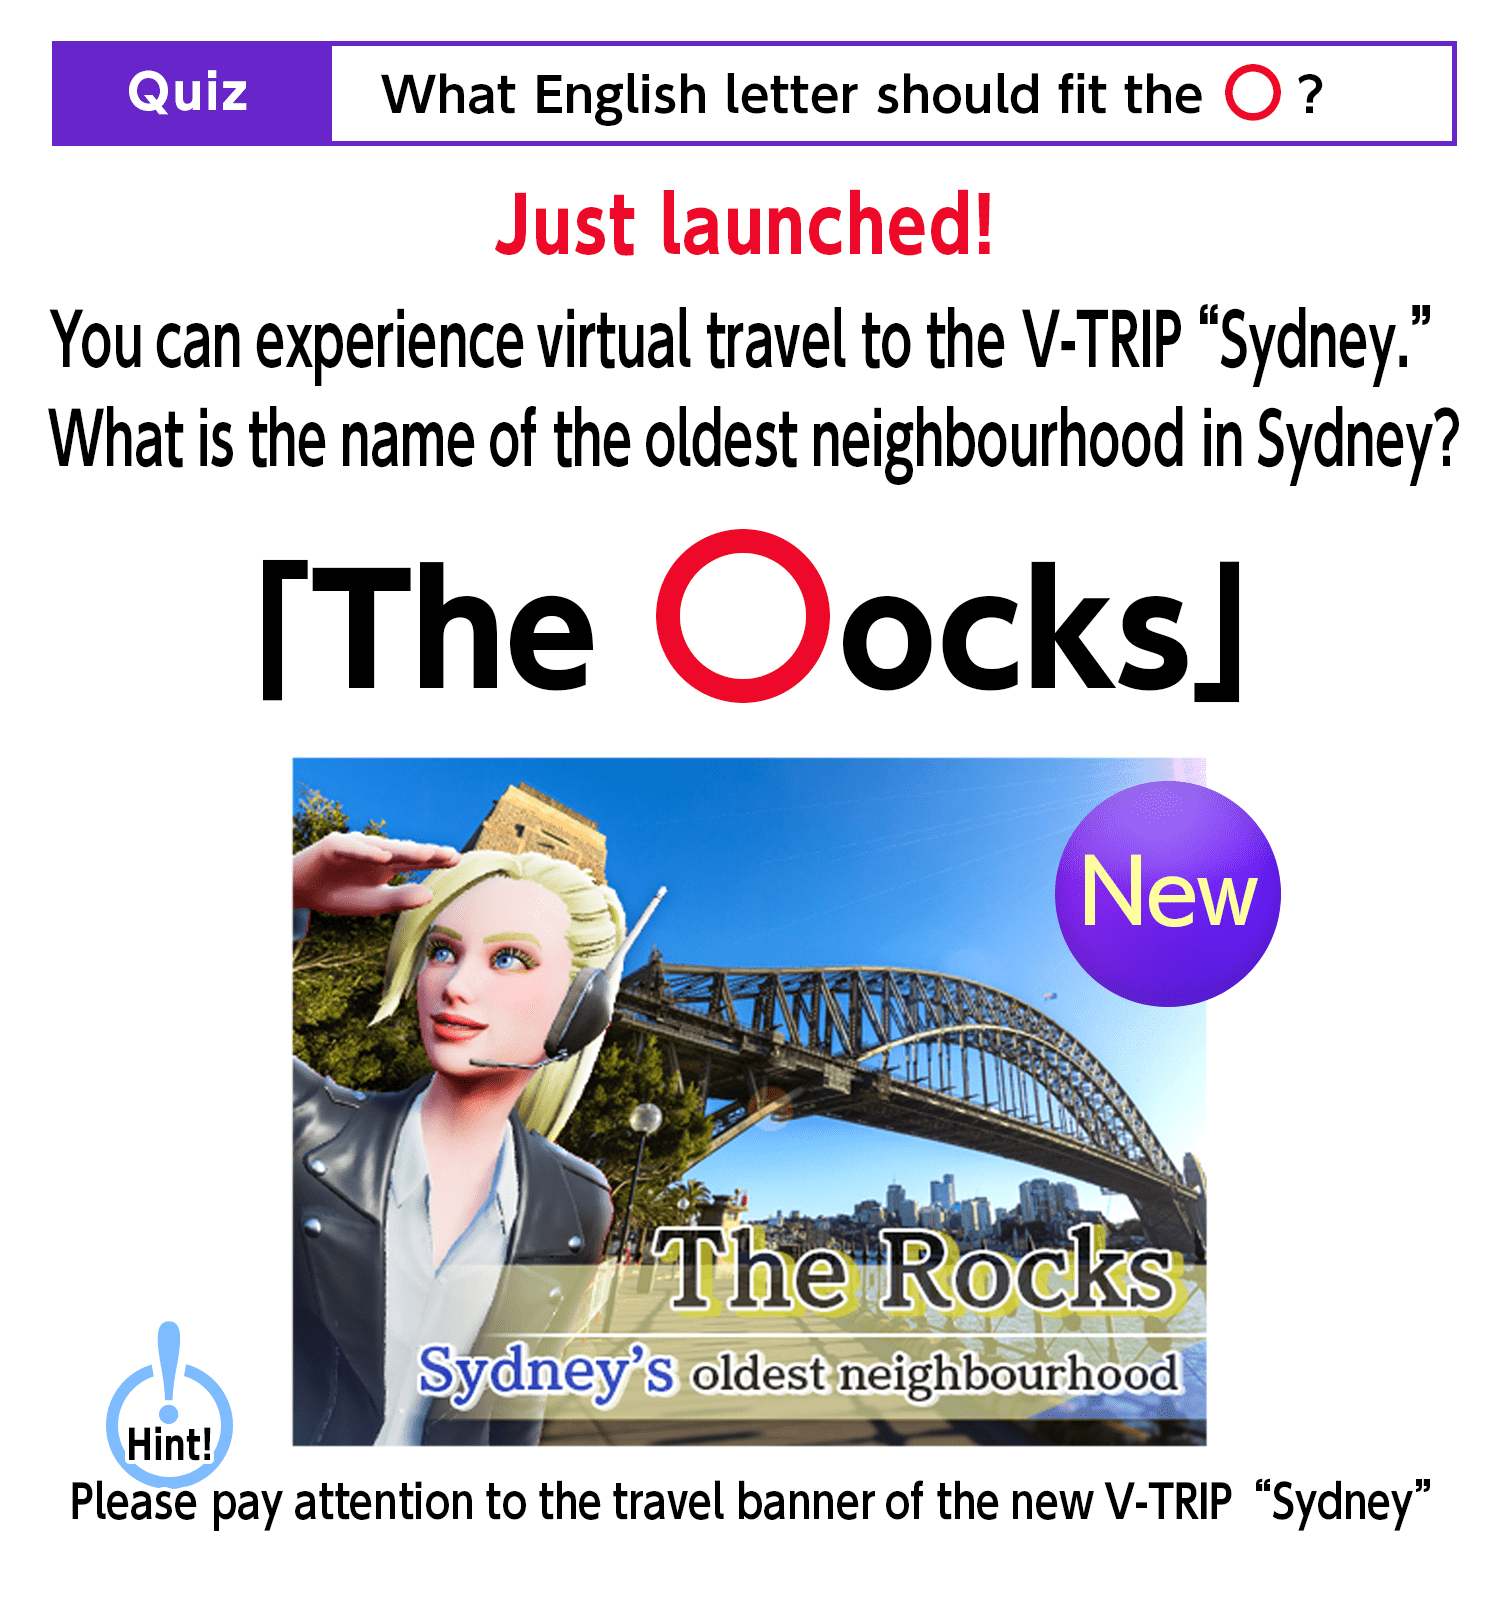 What English letter should fit the 〇? Just launched! You can experience virtual travel to the V-TRIP “Sydney.”What is the name of the oldest neighbourhood in Sydney?“The 〇ocks”Hint! Please pay attention to the travel banner of the new V-TRIP “Sydney!”